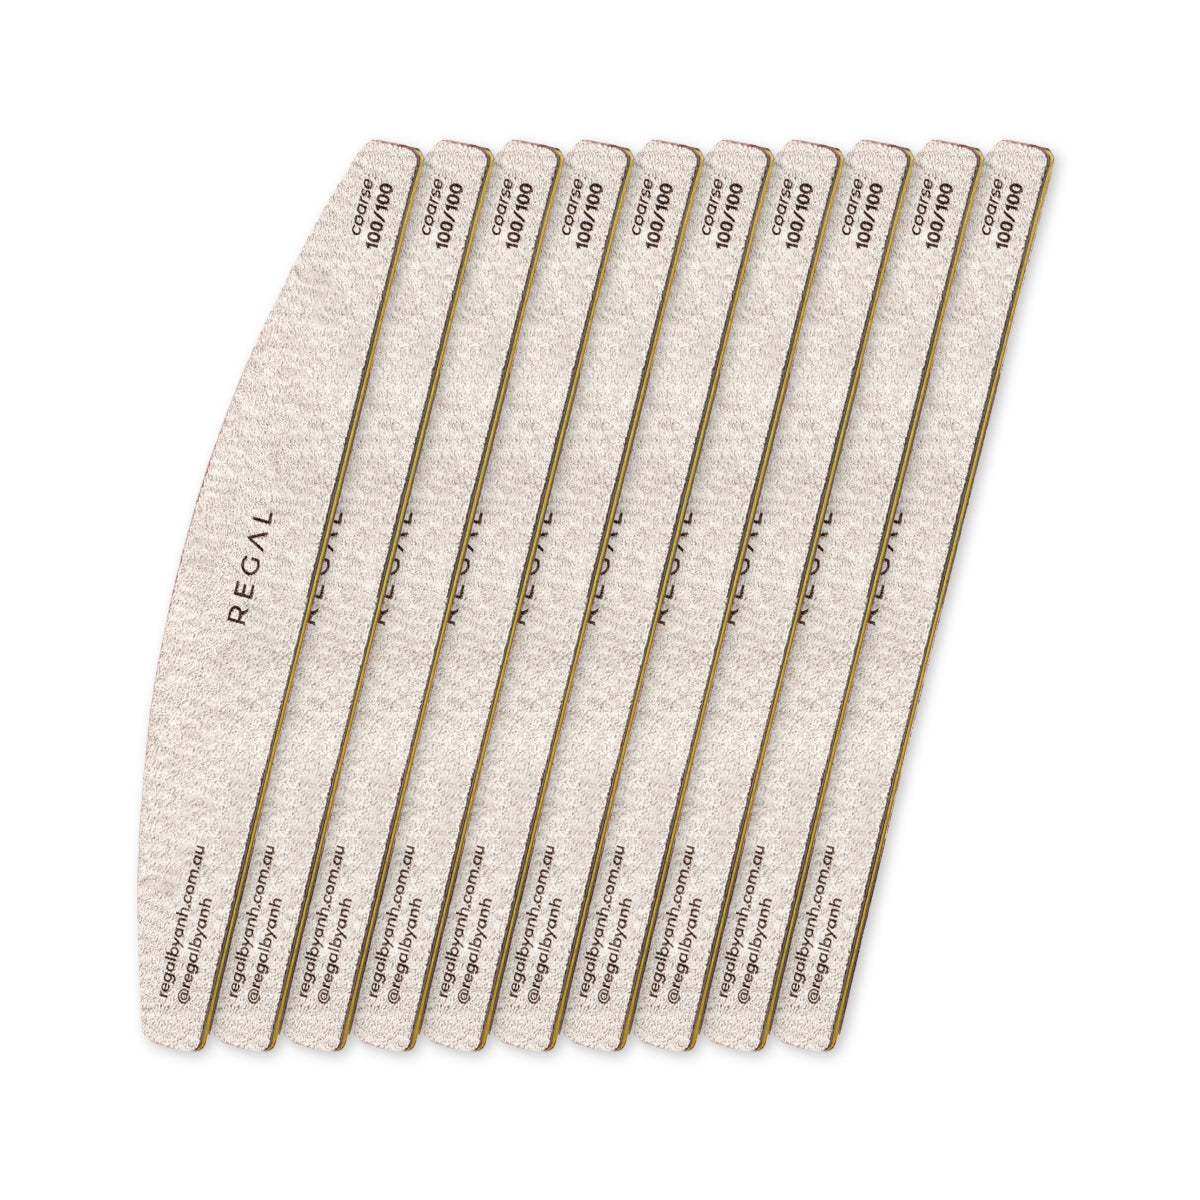 Regal by Anh Harbour Bridge Coarse 100/100 Nail File (10 Pack)